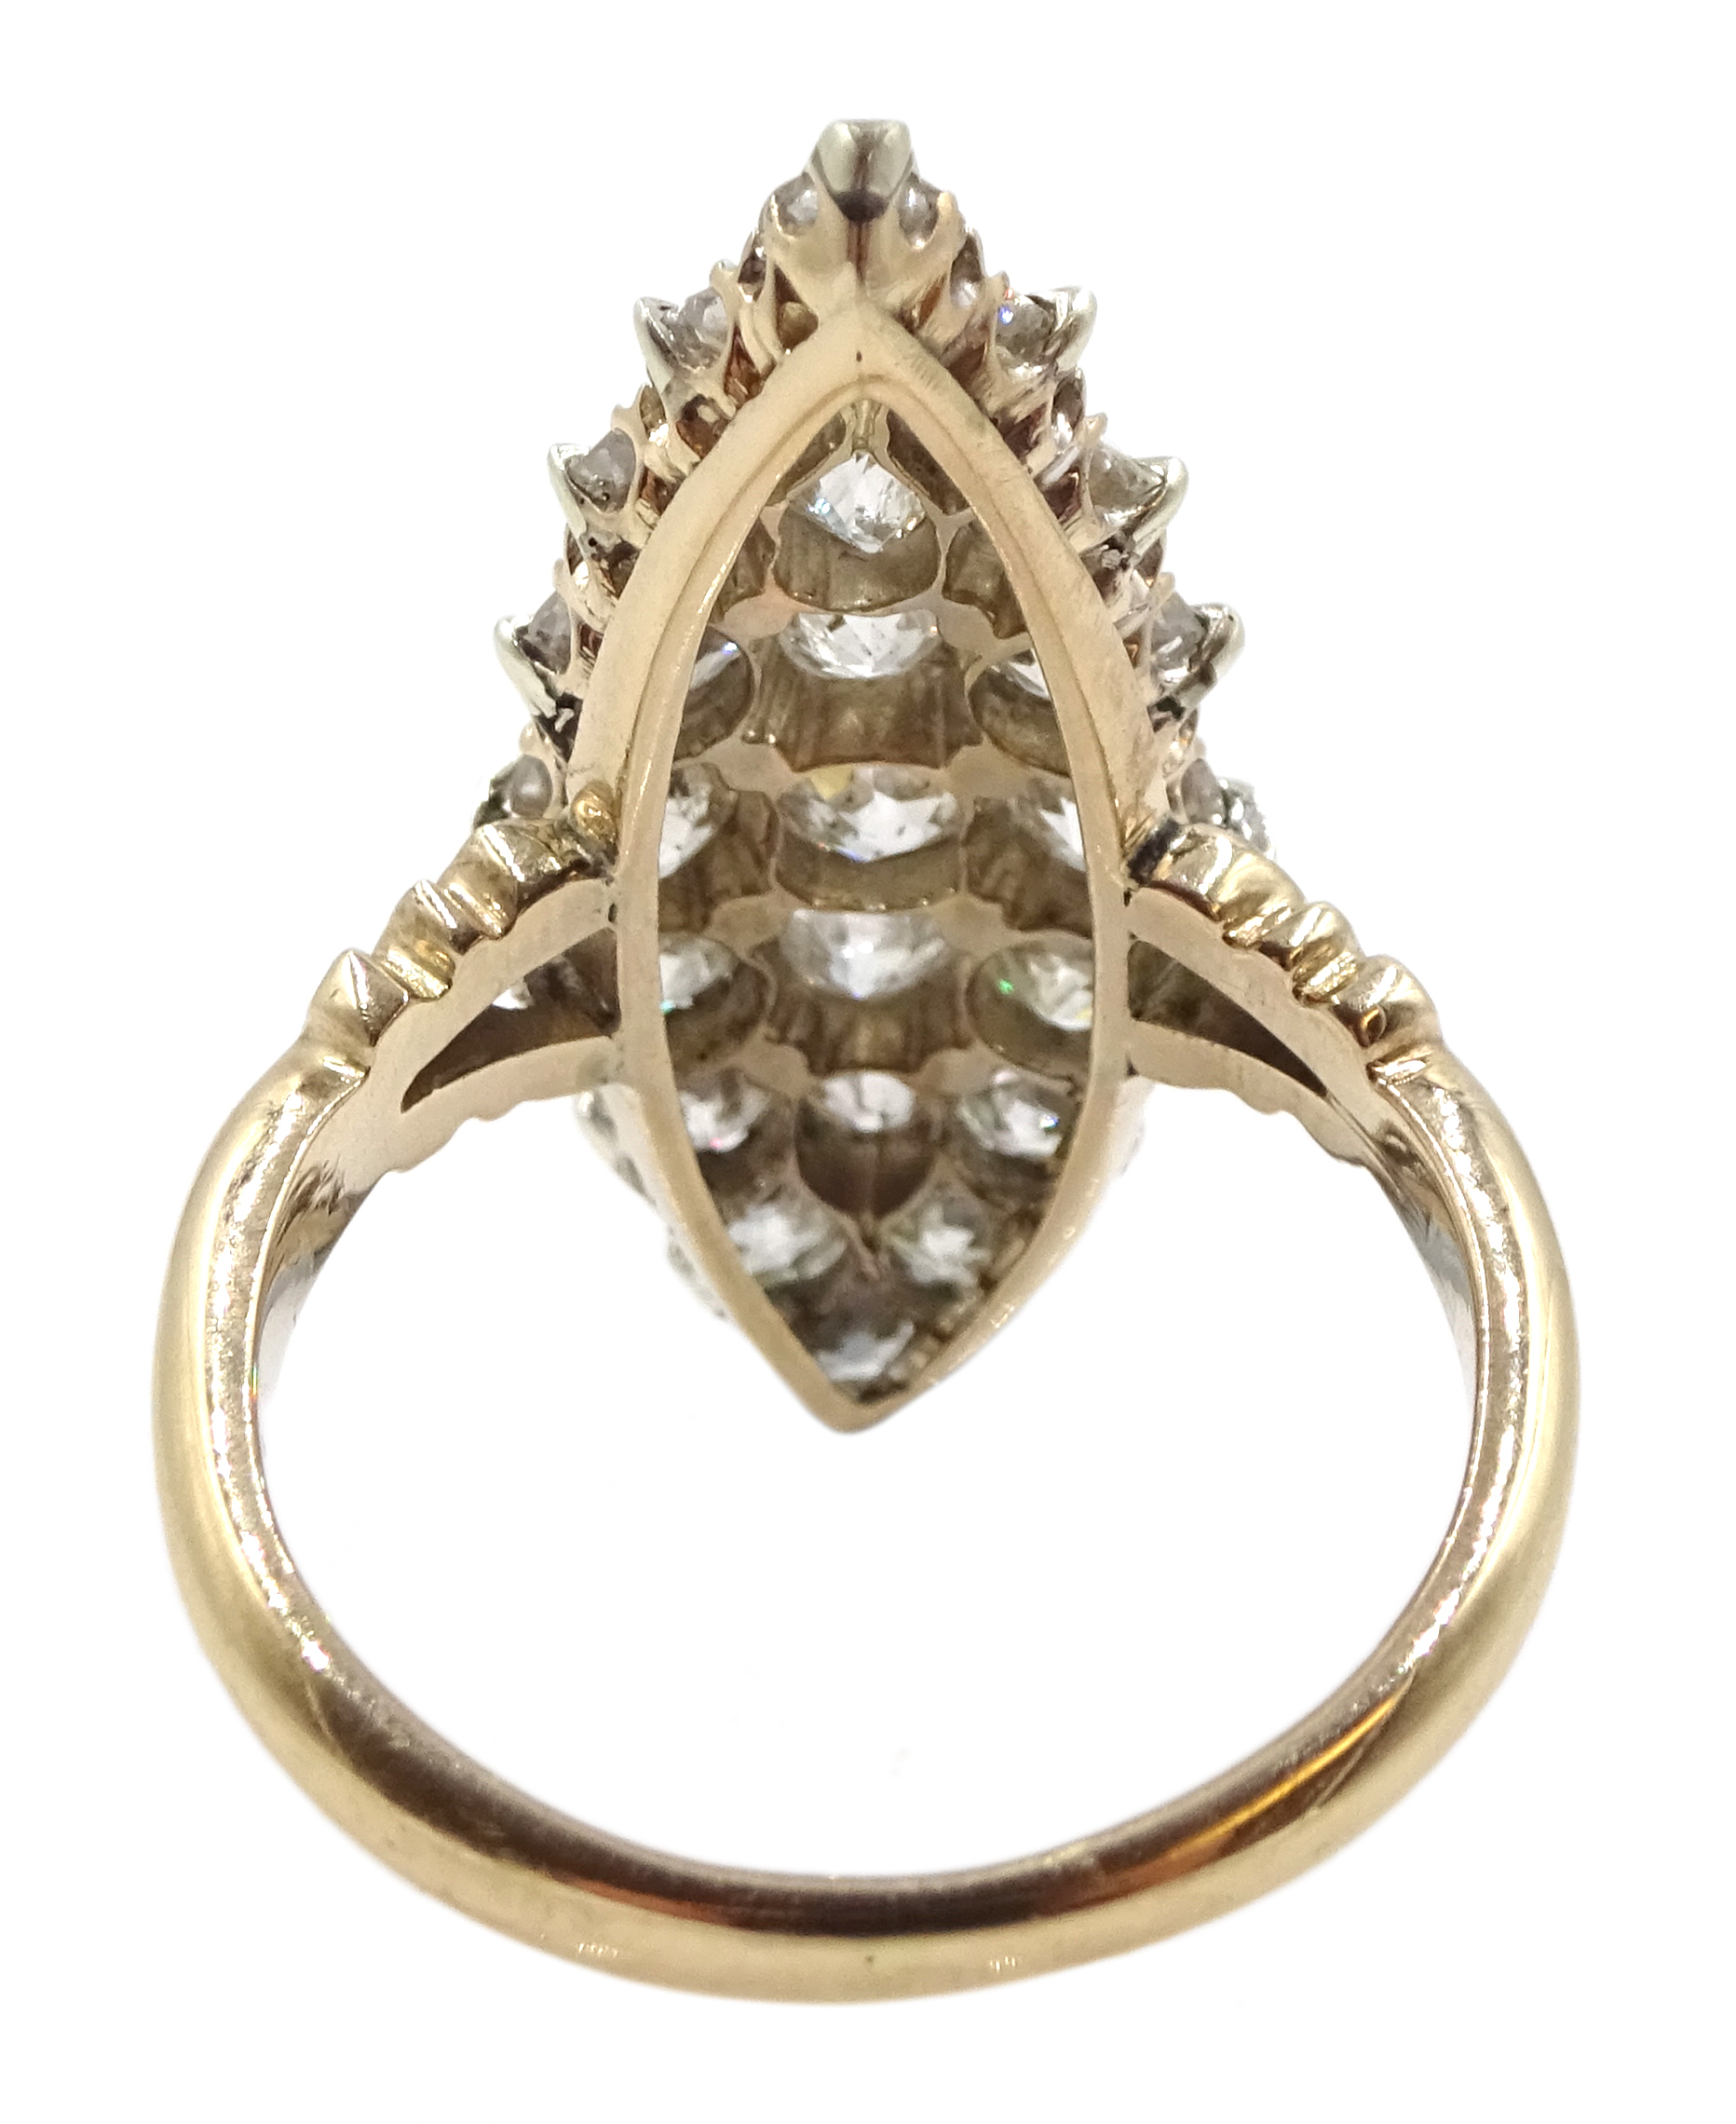 Victorian rose gold and silver, diamond marquise shaped ring, total diamond weight approx 1.70 carat - Image 12 of 12